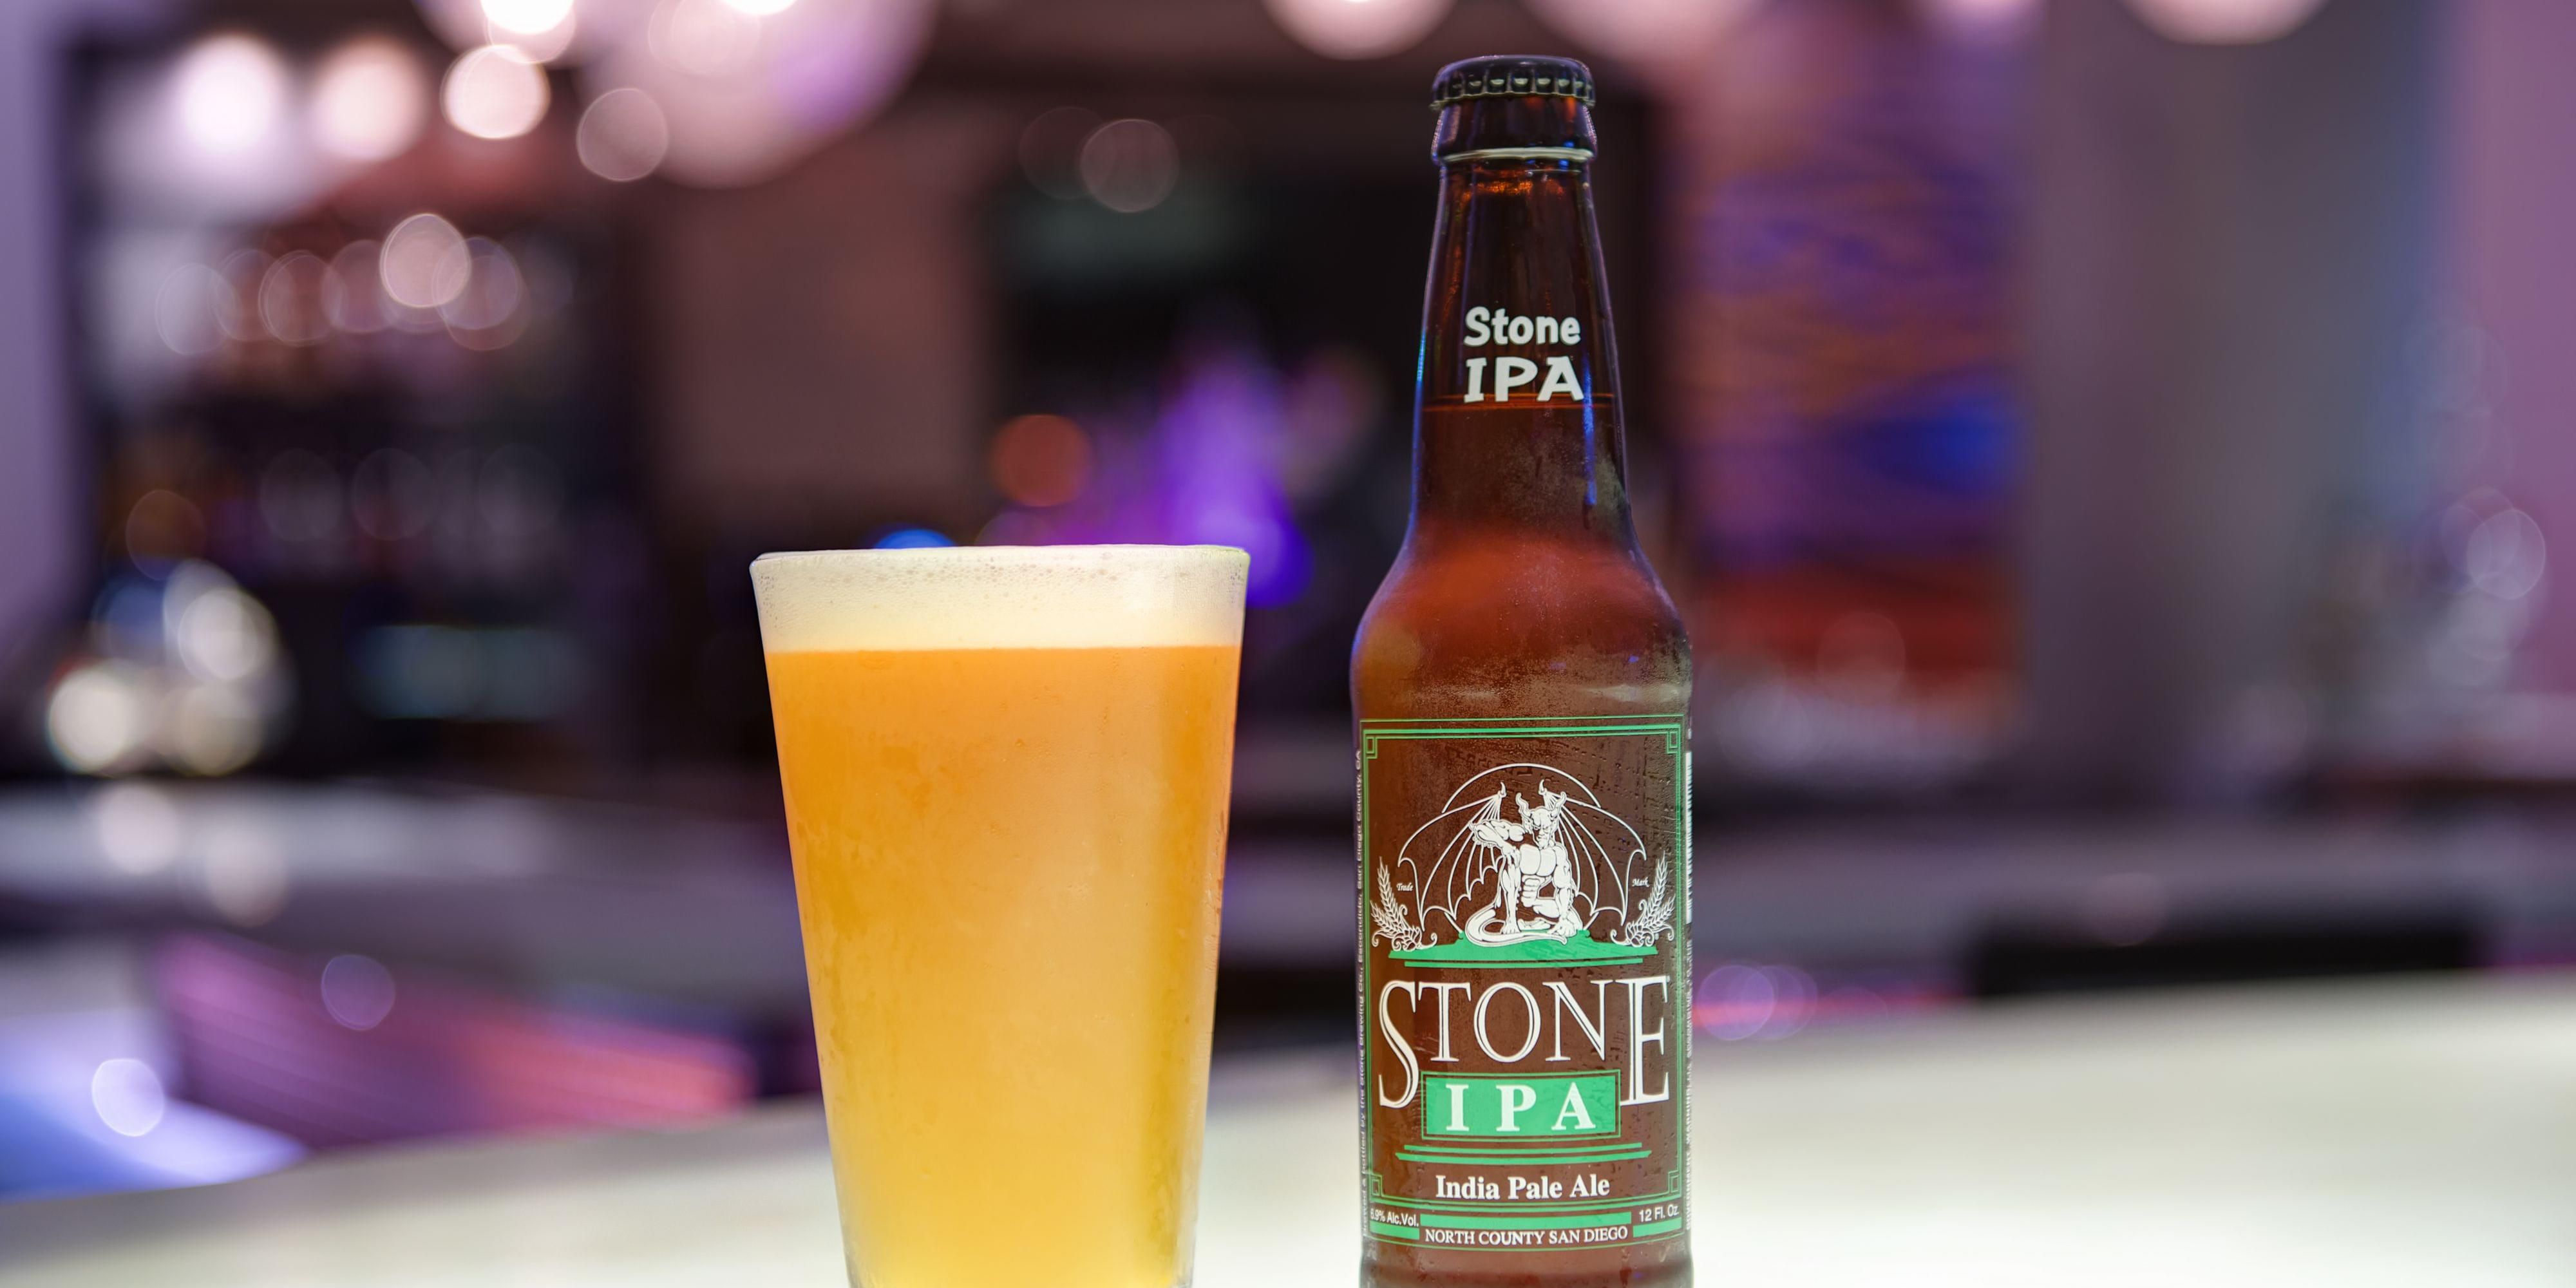 Stone IPA beer in our bar